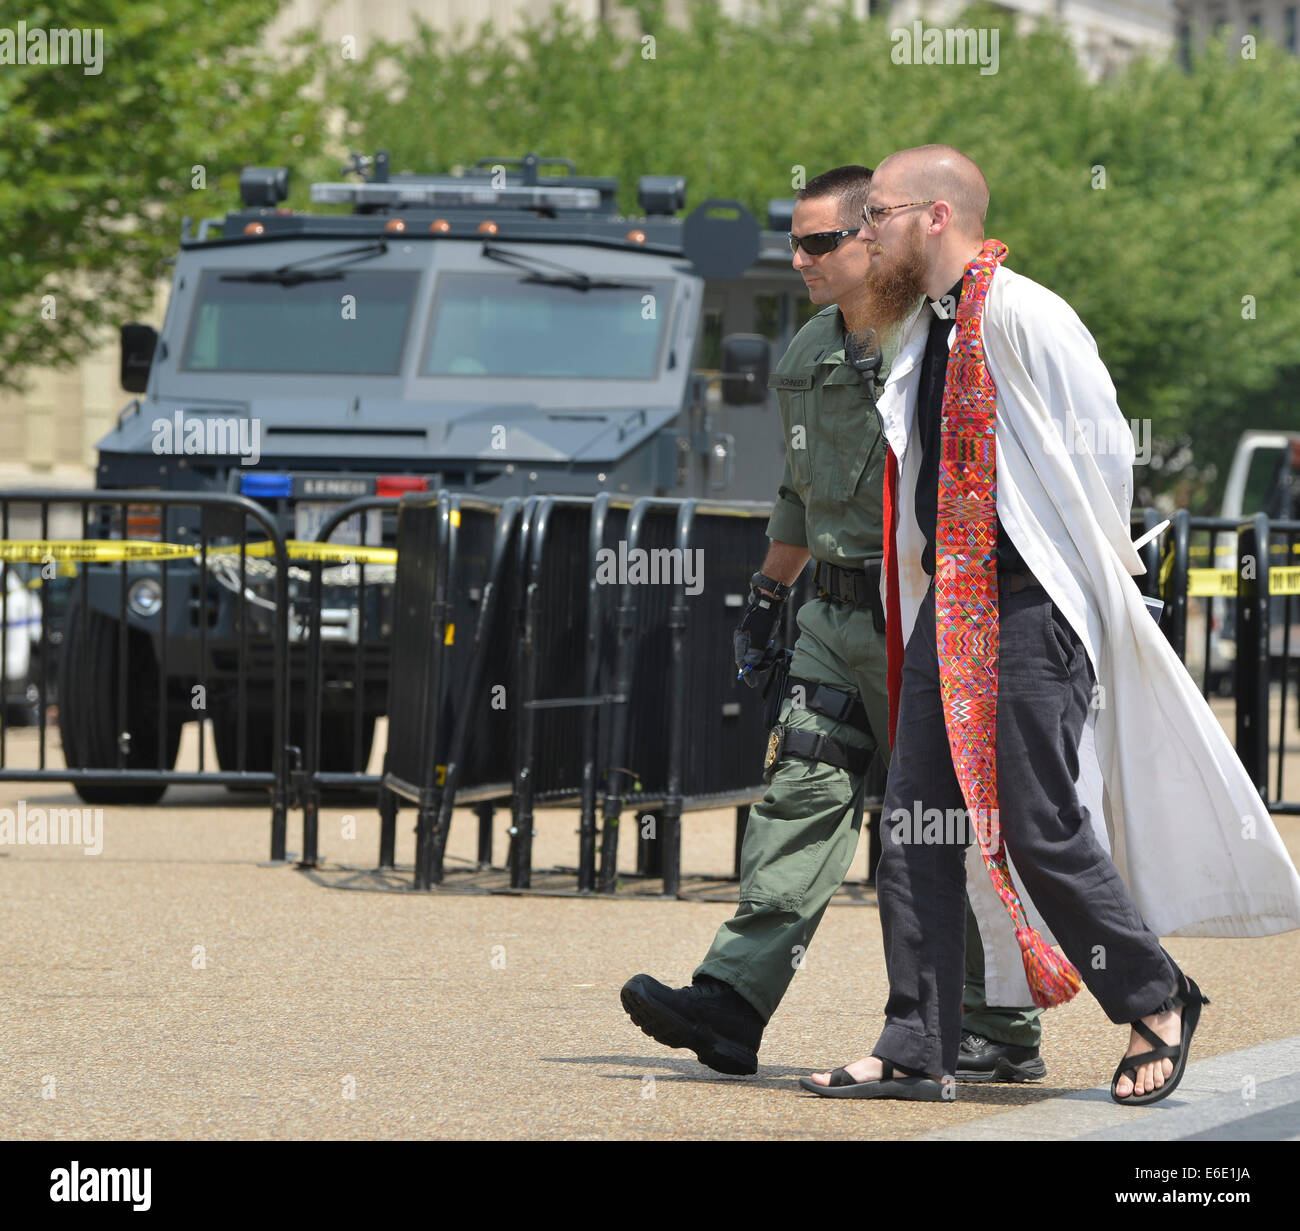 Washington, DC, USA. 31st July, 2014. The Rev. Jeffrey K. Hood, a Baptist pastor from Texas, is arrested in front of the White House during an immigration protest that also included faith leaders from the United Methodist Church, Catholics, Unitarian Universalists, Quakers, Jews, and others. Although the faith leaders cooperated with U.S. Park Police and notified them in advance of the peaceable protest and their intention to be arrested, the police response included a military-style 'BearCat'' armored personnel carrier, seen in the background. Police use of such equipment in Ferguson, Mis Stock Photo